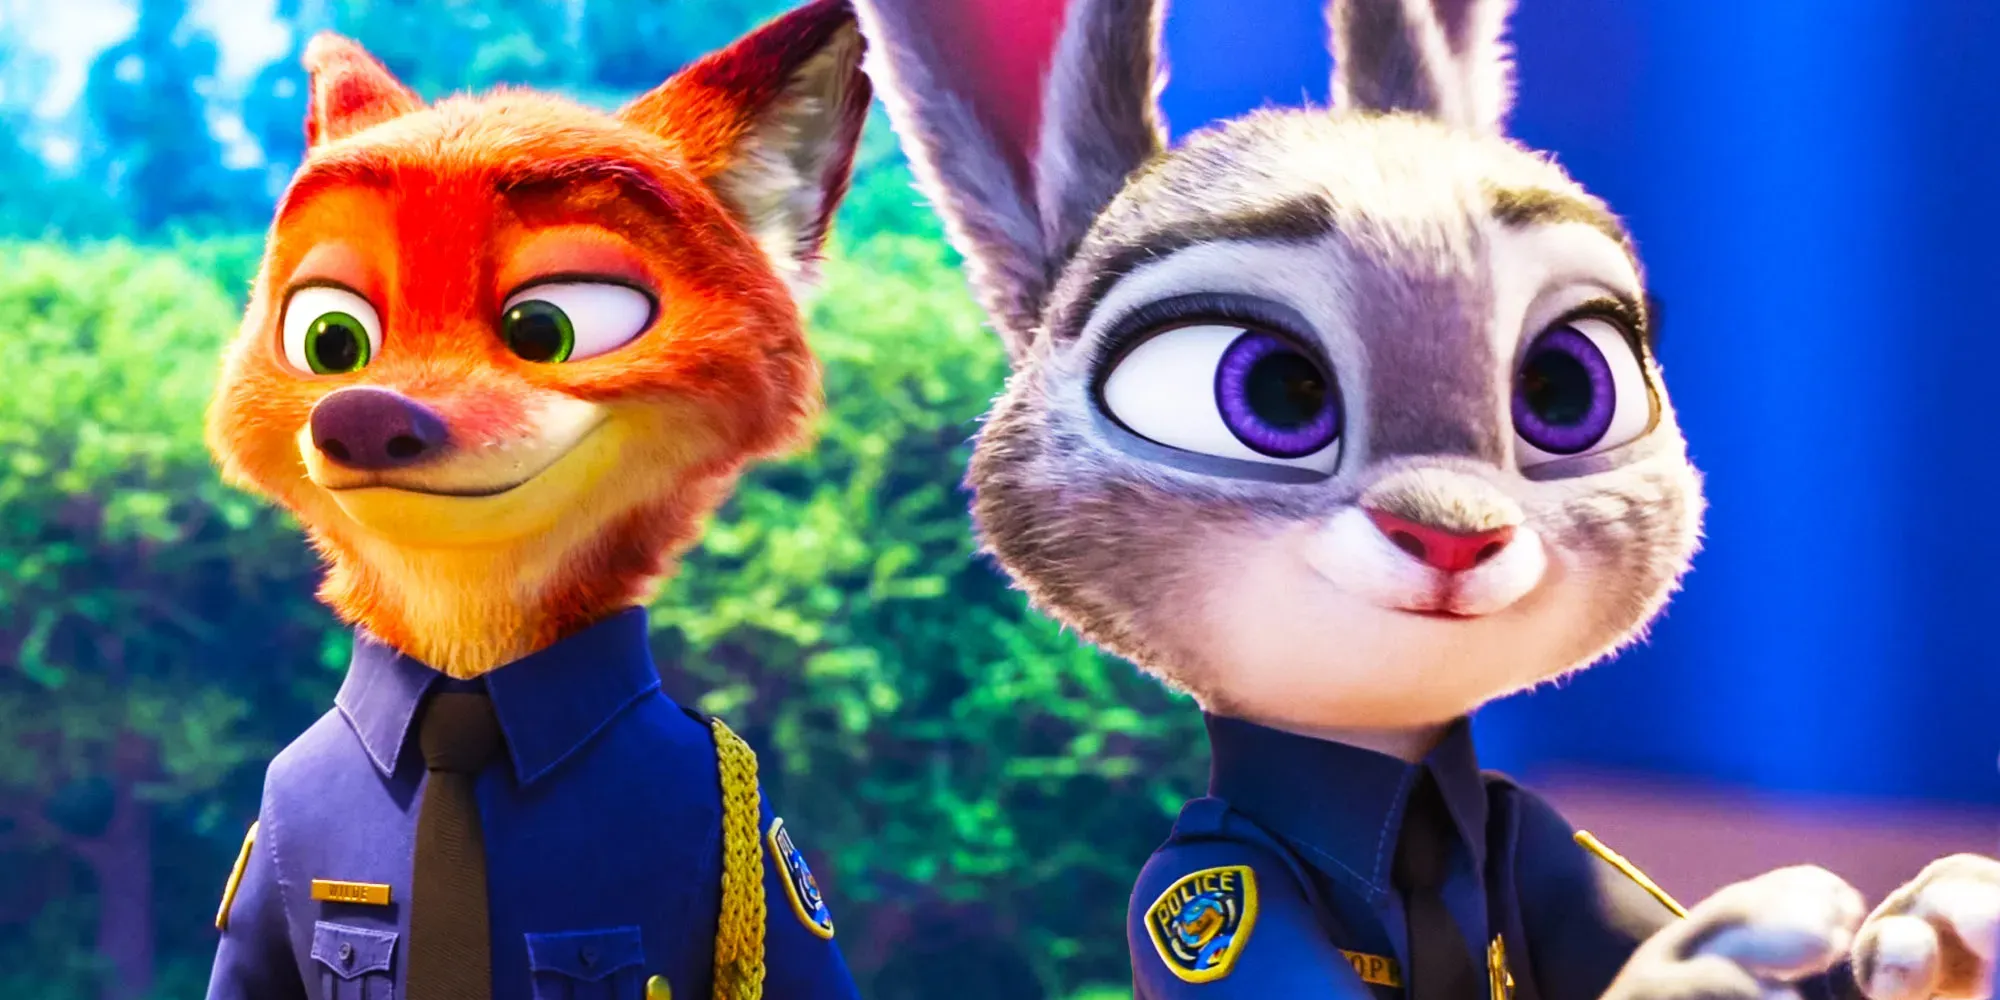 Zootopia 2: What is the Current Status of Zootopia 2?